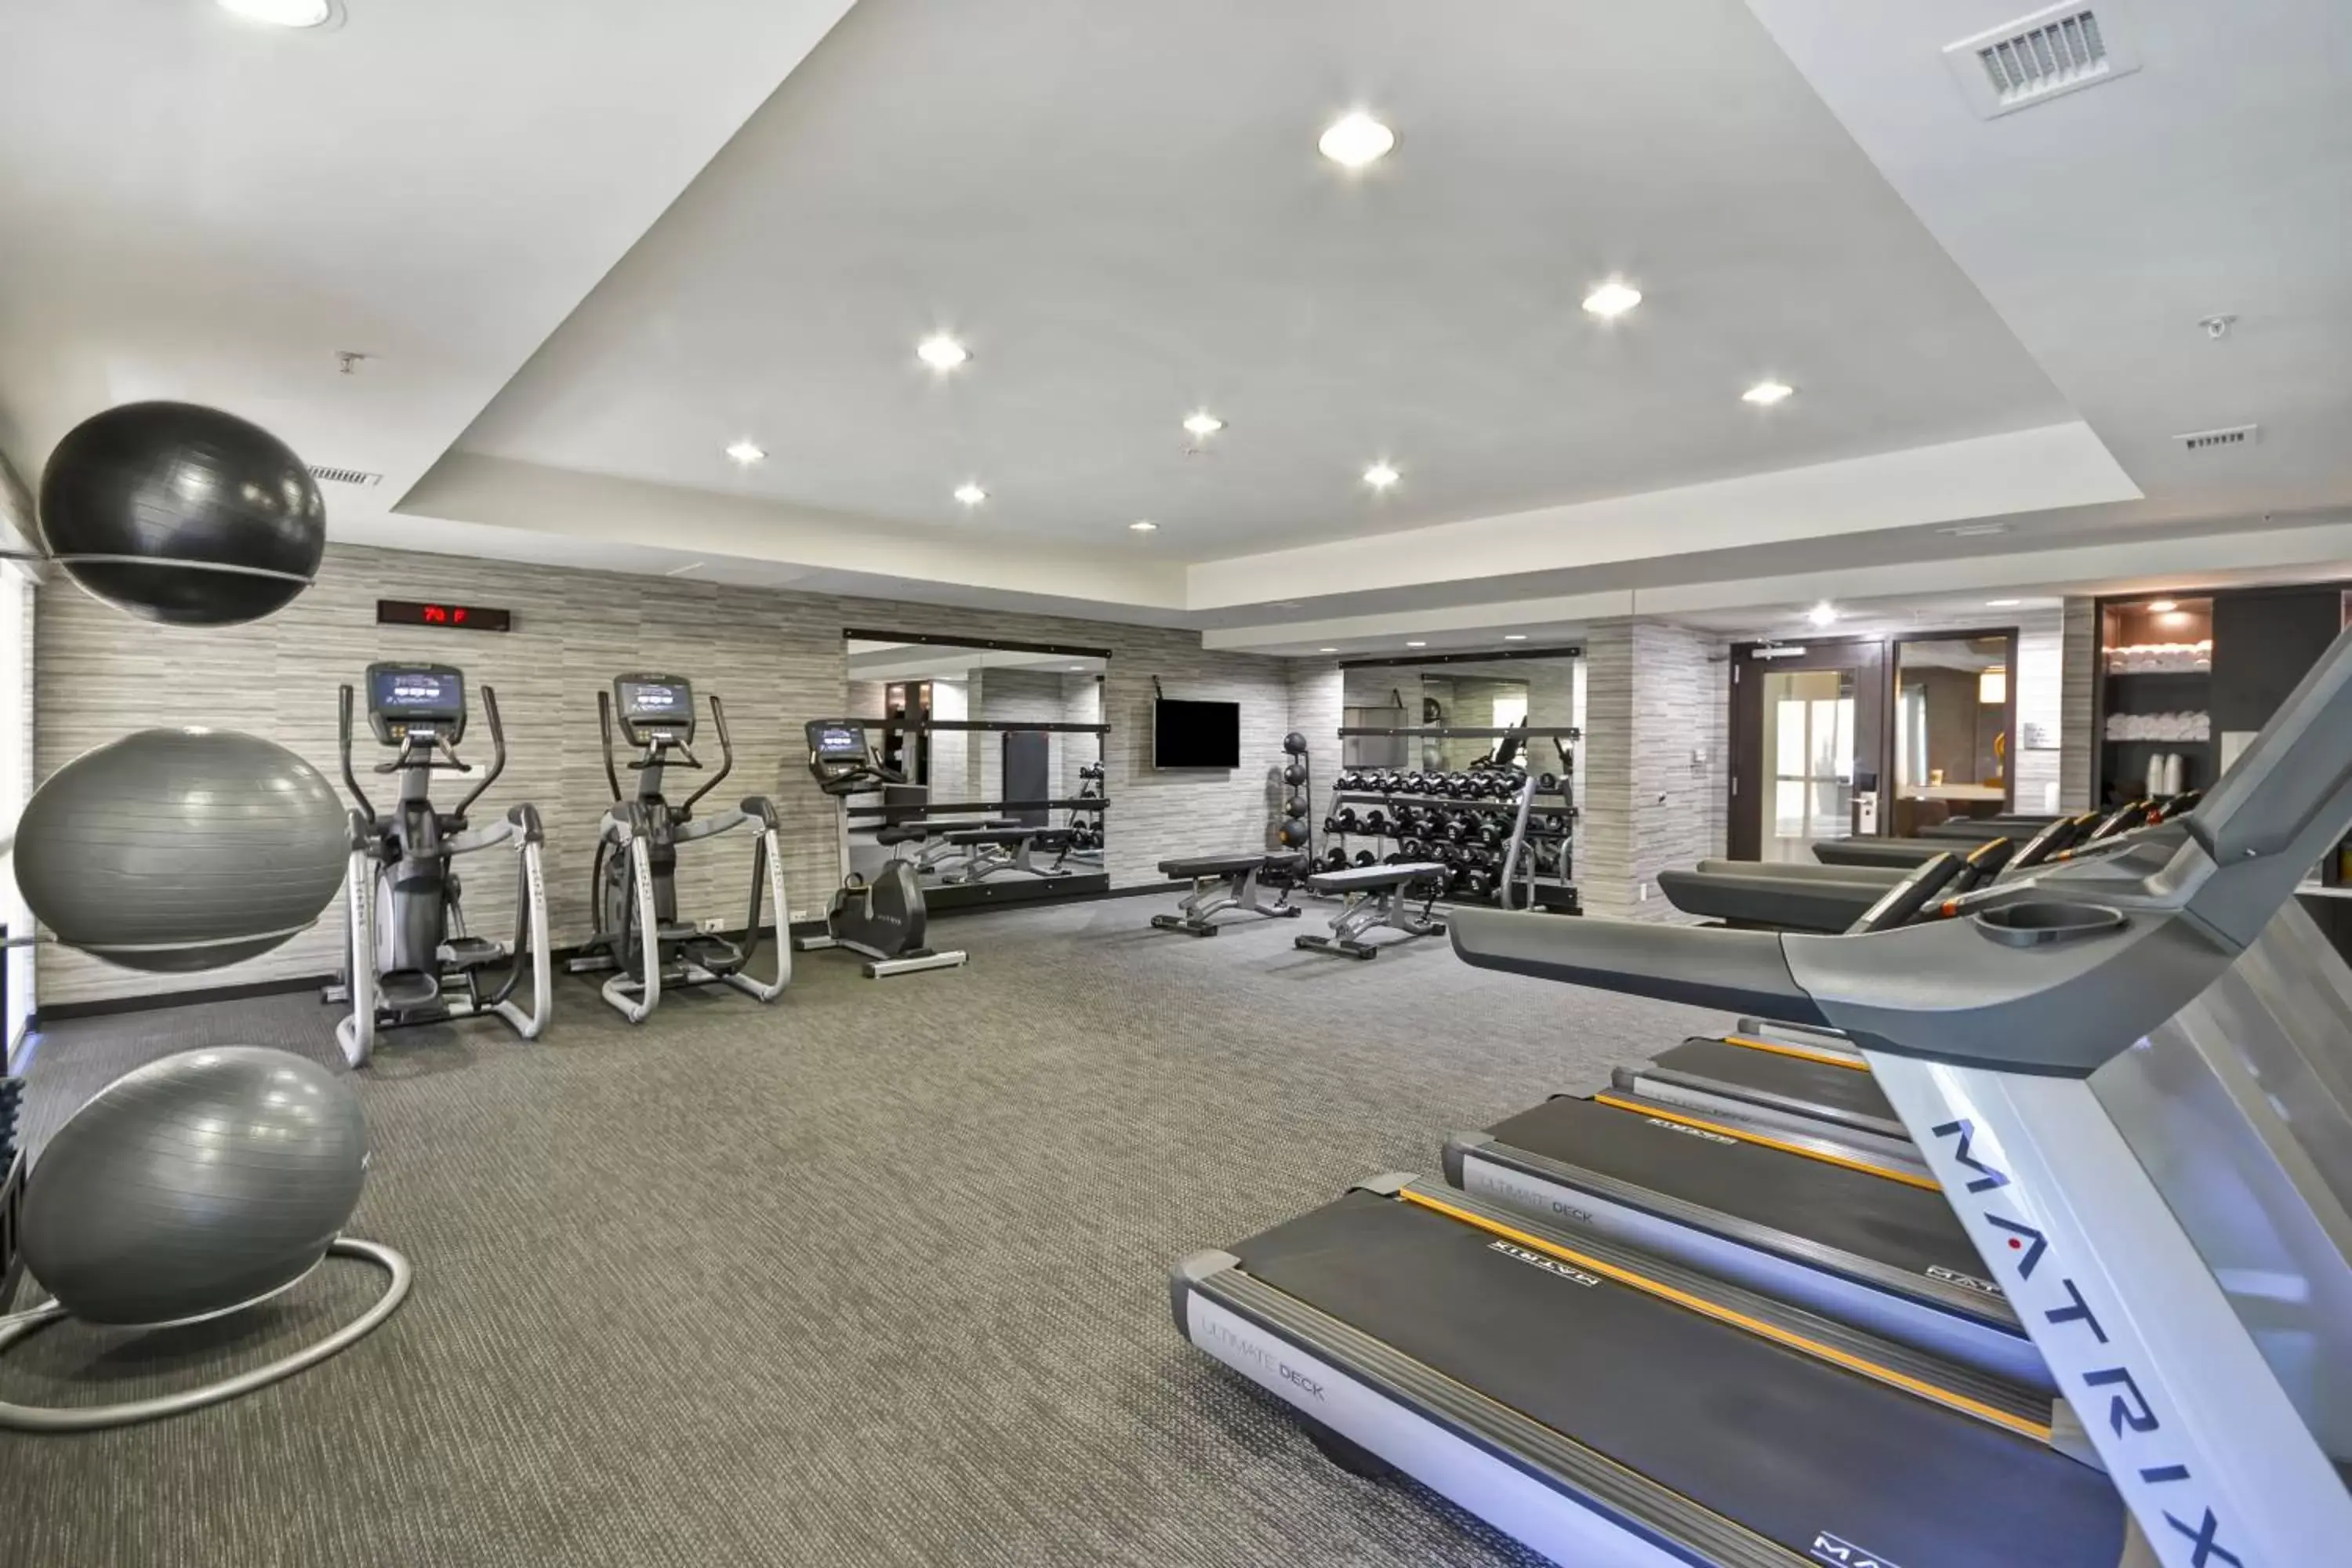 Fitness centre/facilities, Fitness Center/Facilities in Courtyard by Marriott Dalton